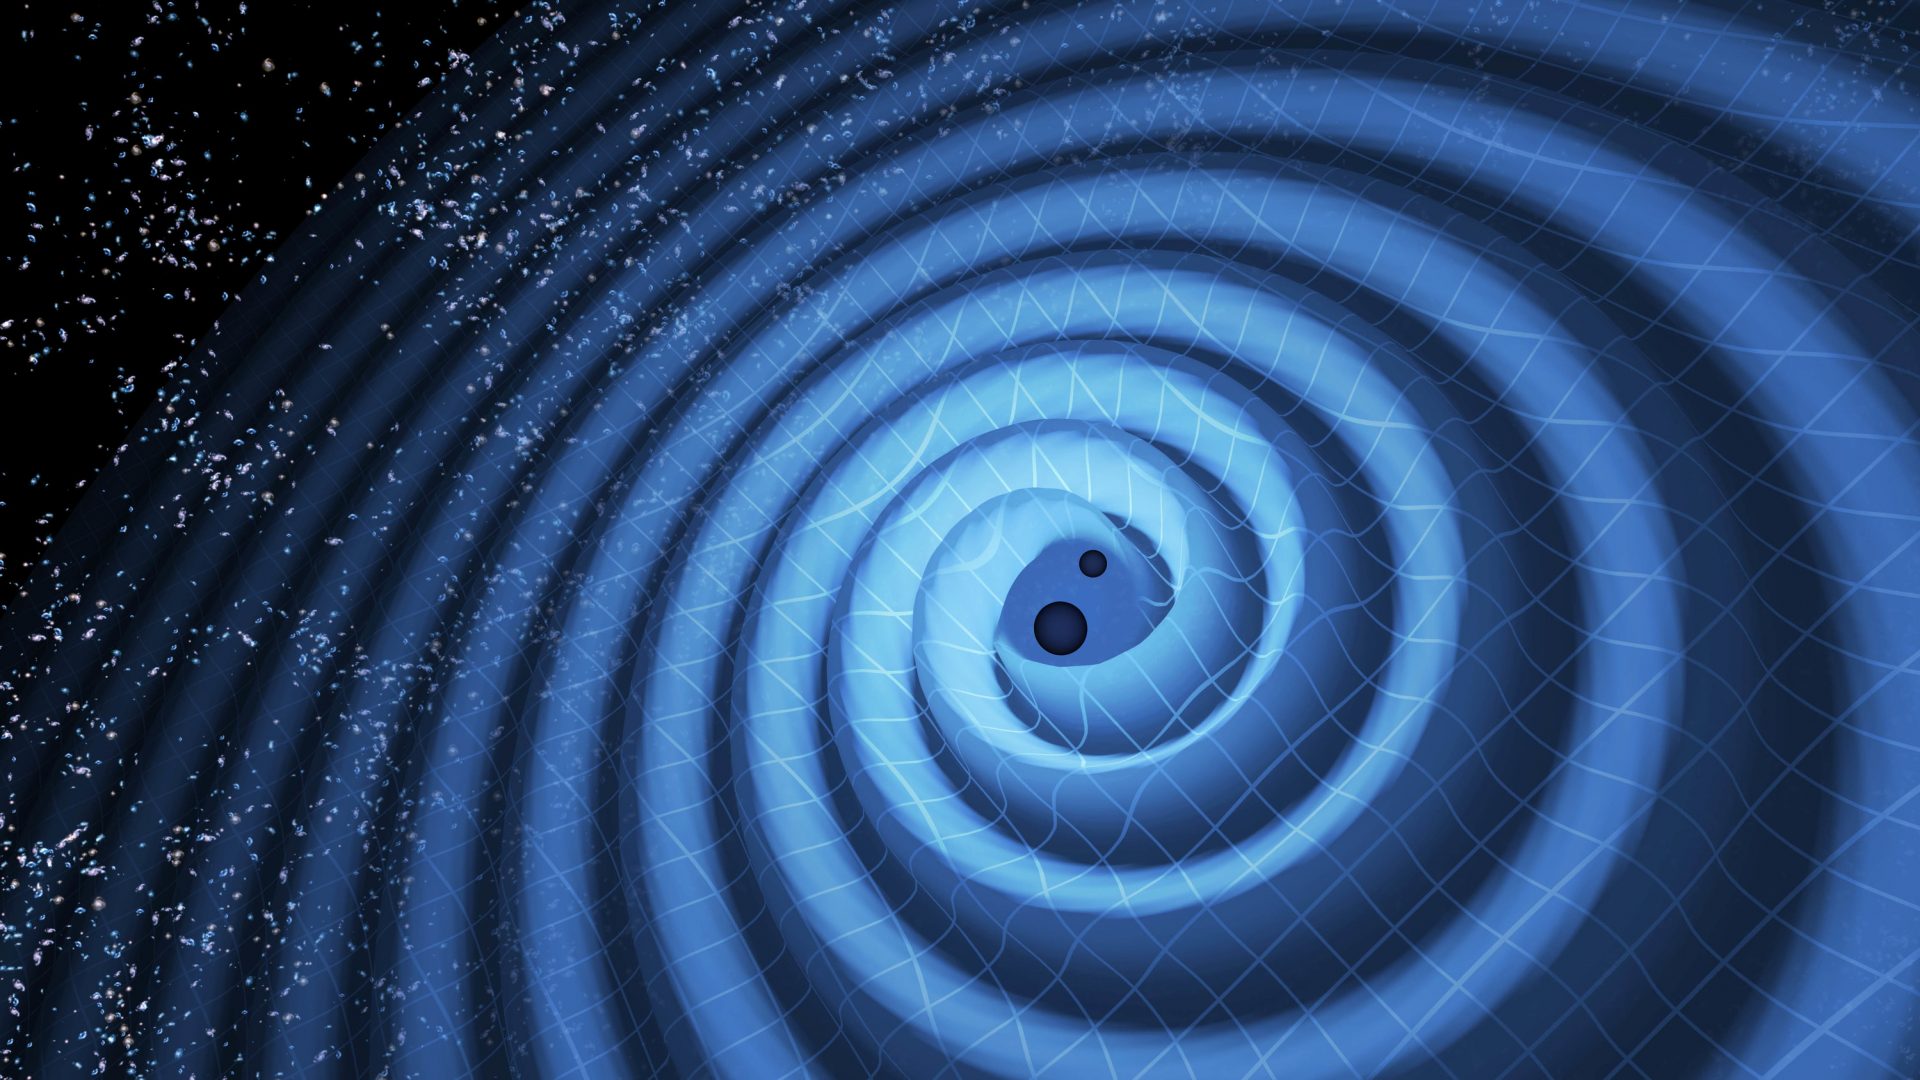 Did a holographic segment transition in the early universe release gravitational waves?